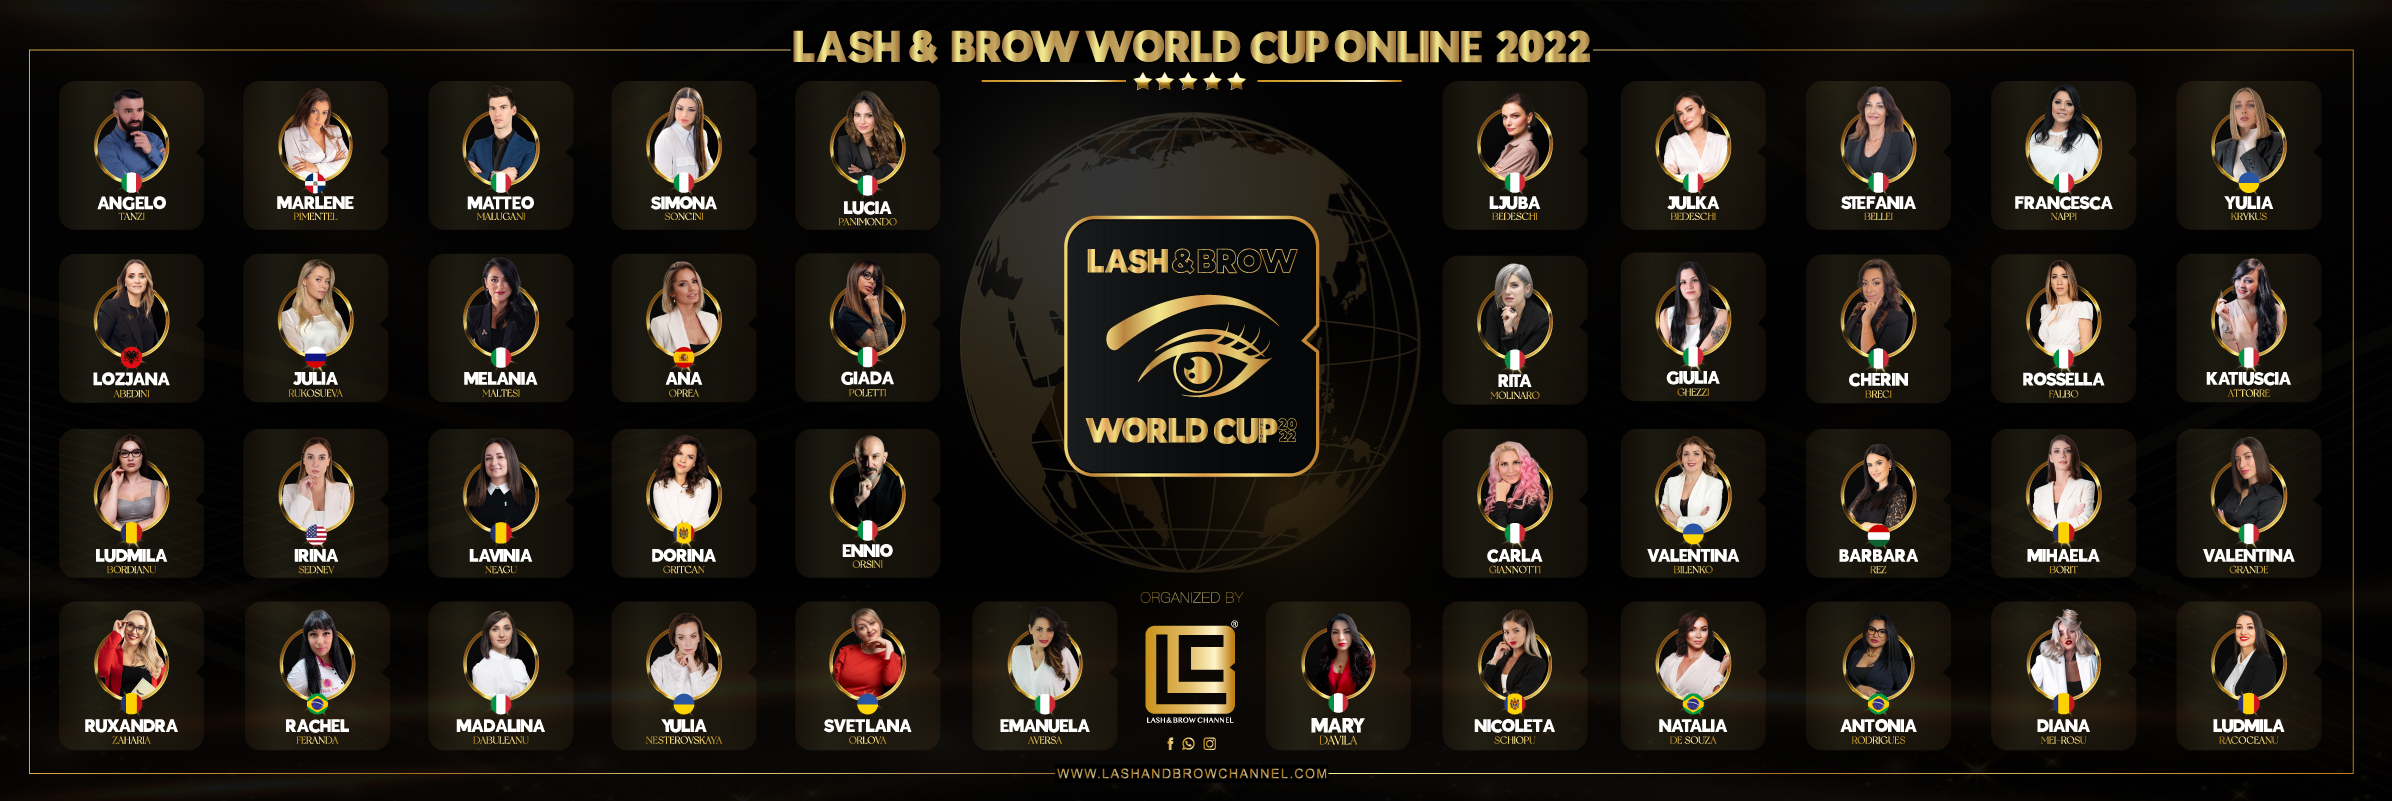 The judges of the Third Competition Lash & Brow World Cup Online 2022